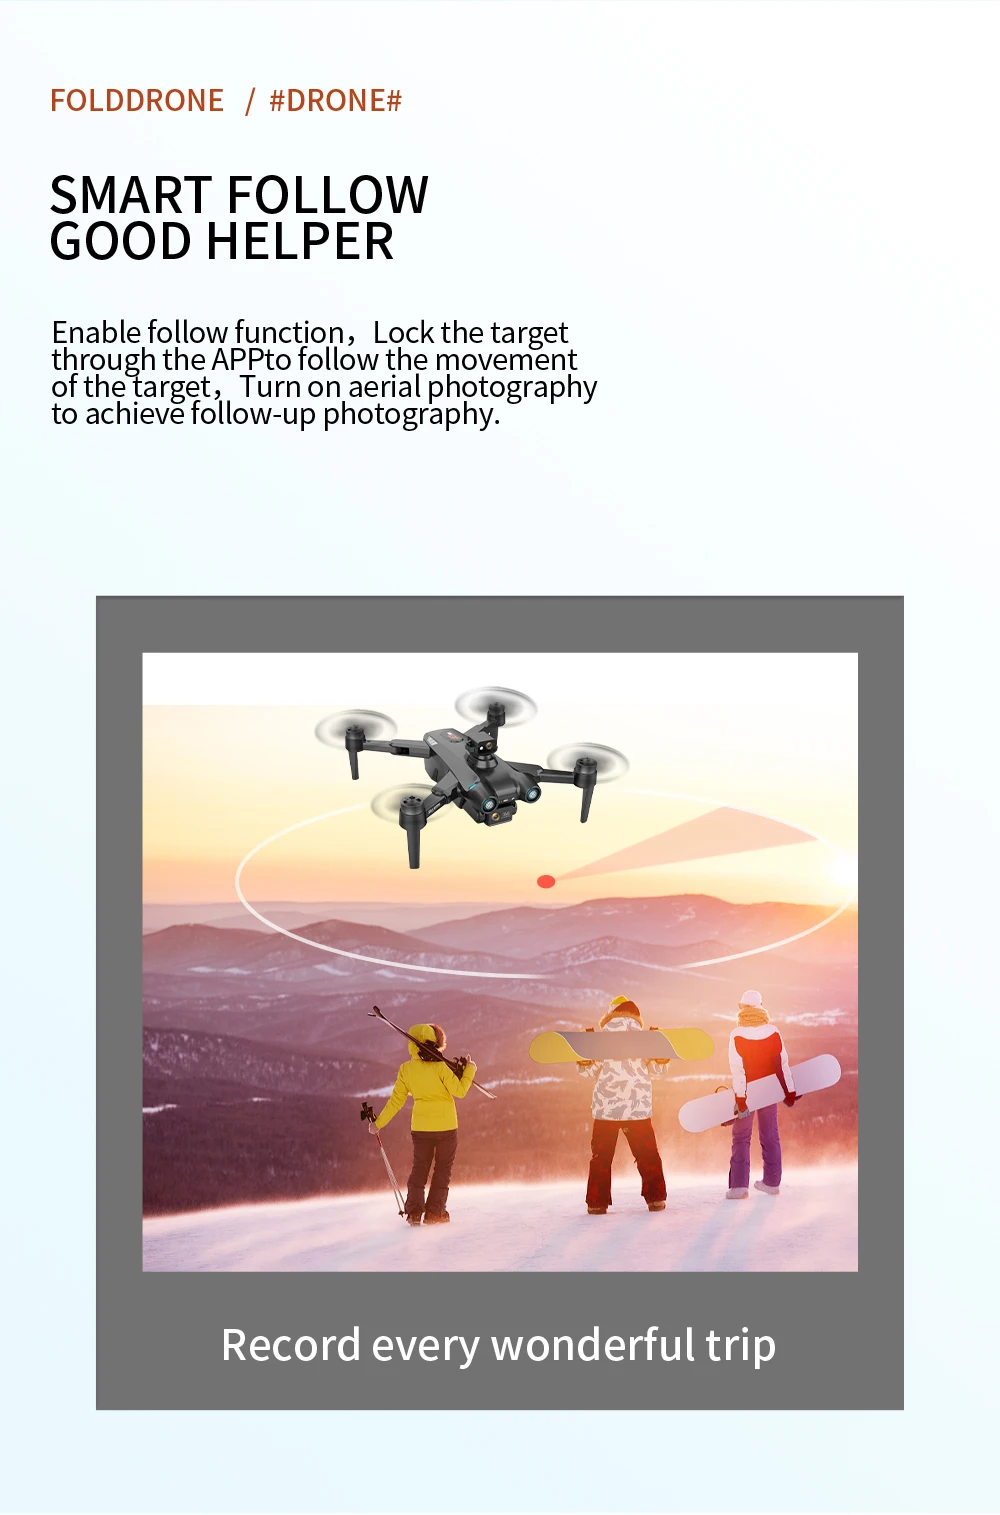 New AE6 / AE6 Max Drone, turn on aerial photography to achieve follow-up photography: Record every wonderful trip you make .